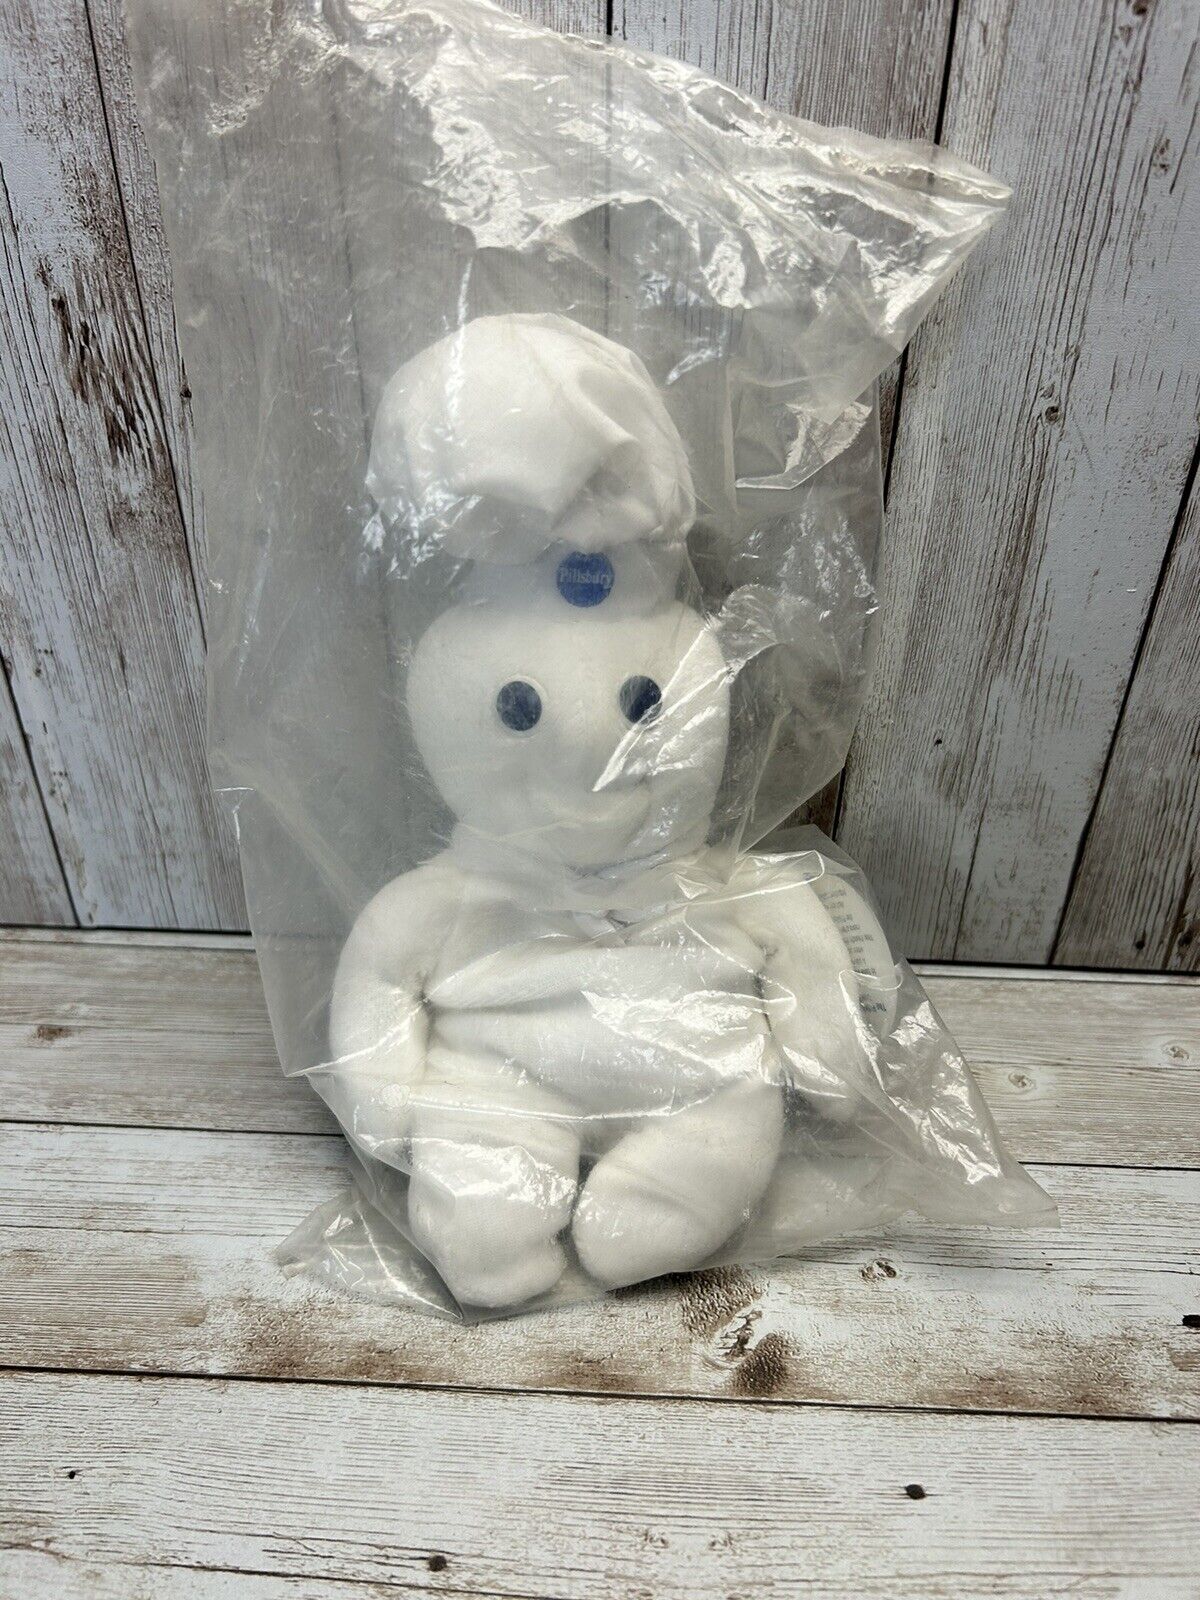 Collector\'s - NEW In Bag - Pillsbury Doughboy Beanie Baby Plush 1997 Stuffed Toy